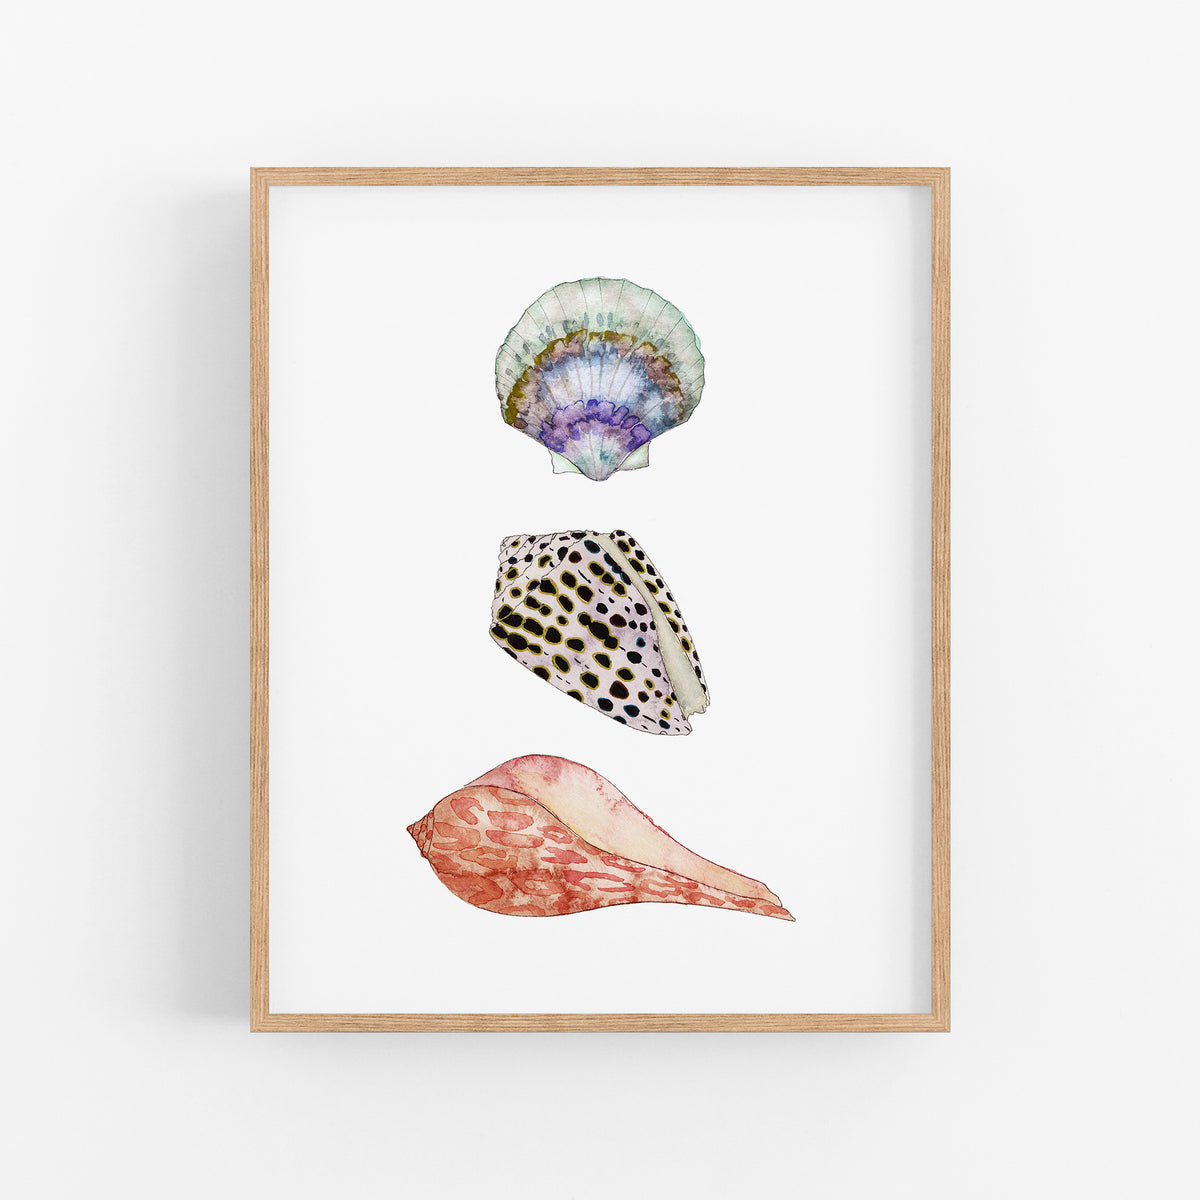 three seashells on a white background framed in a wooden frame